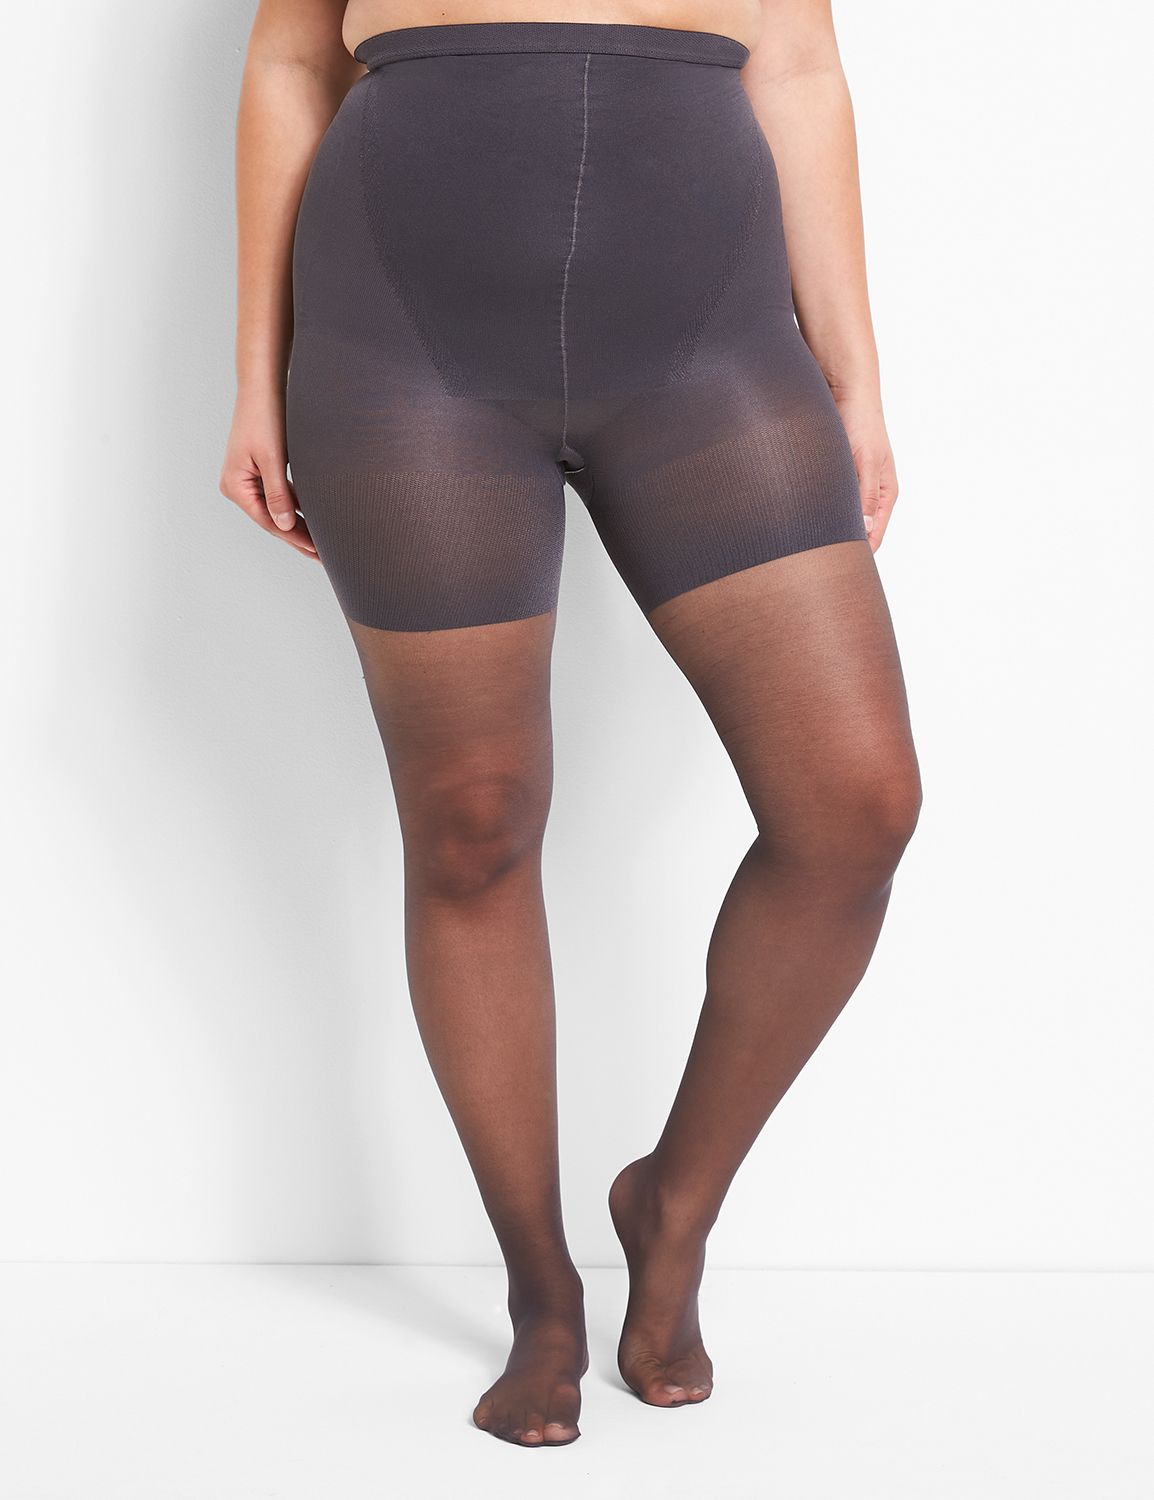 Super Opaque Smooth Control Tights - Set Me Free